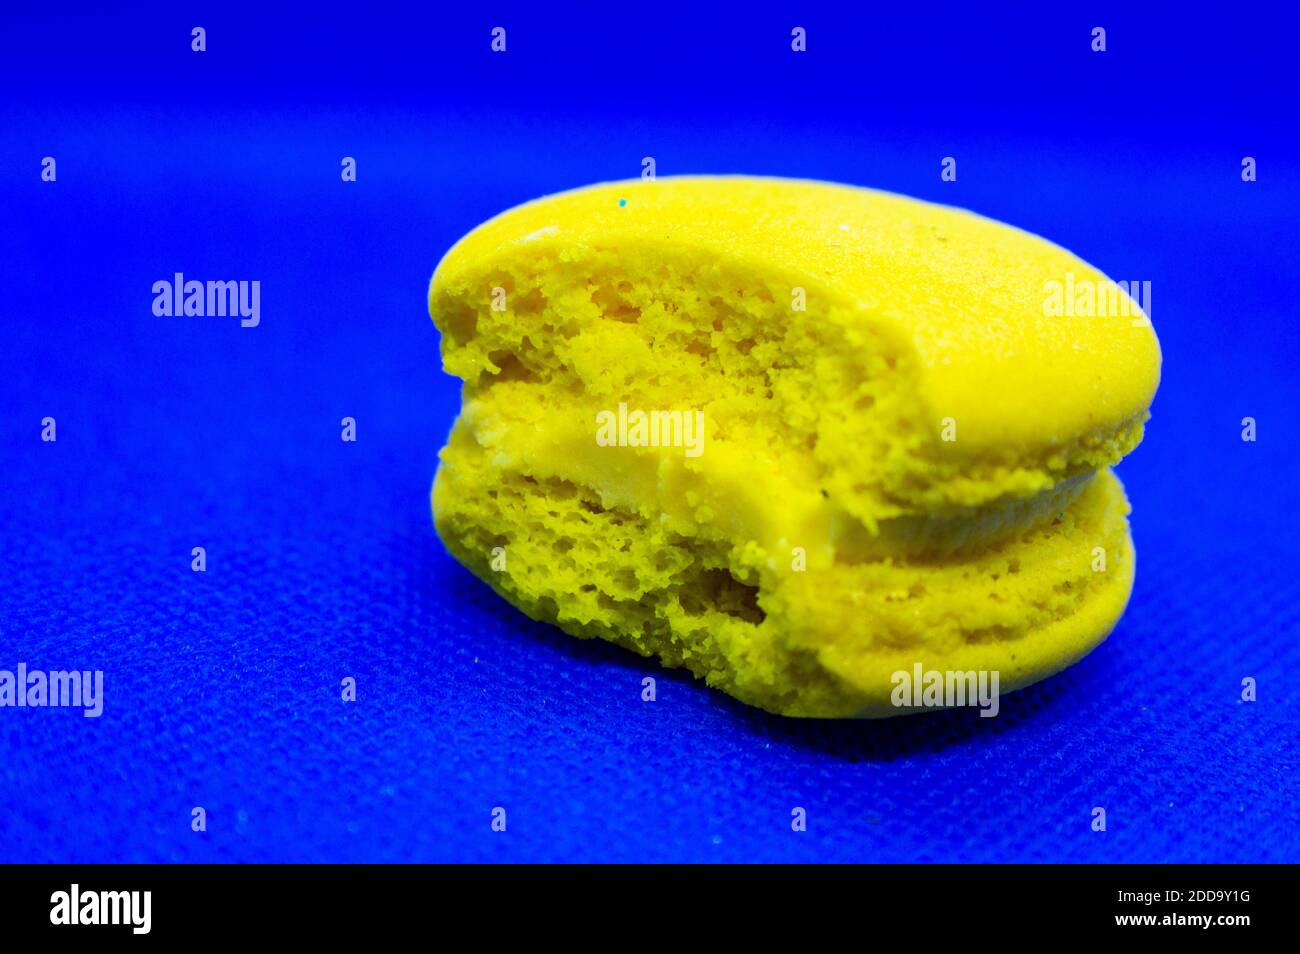 Almond macaroni bitten yellow on a blue background.Bright contrast colors Stock Photo